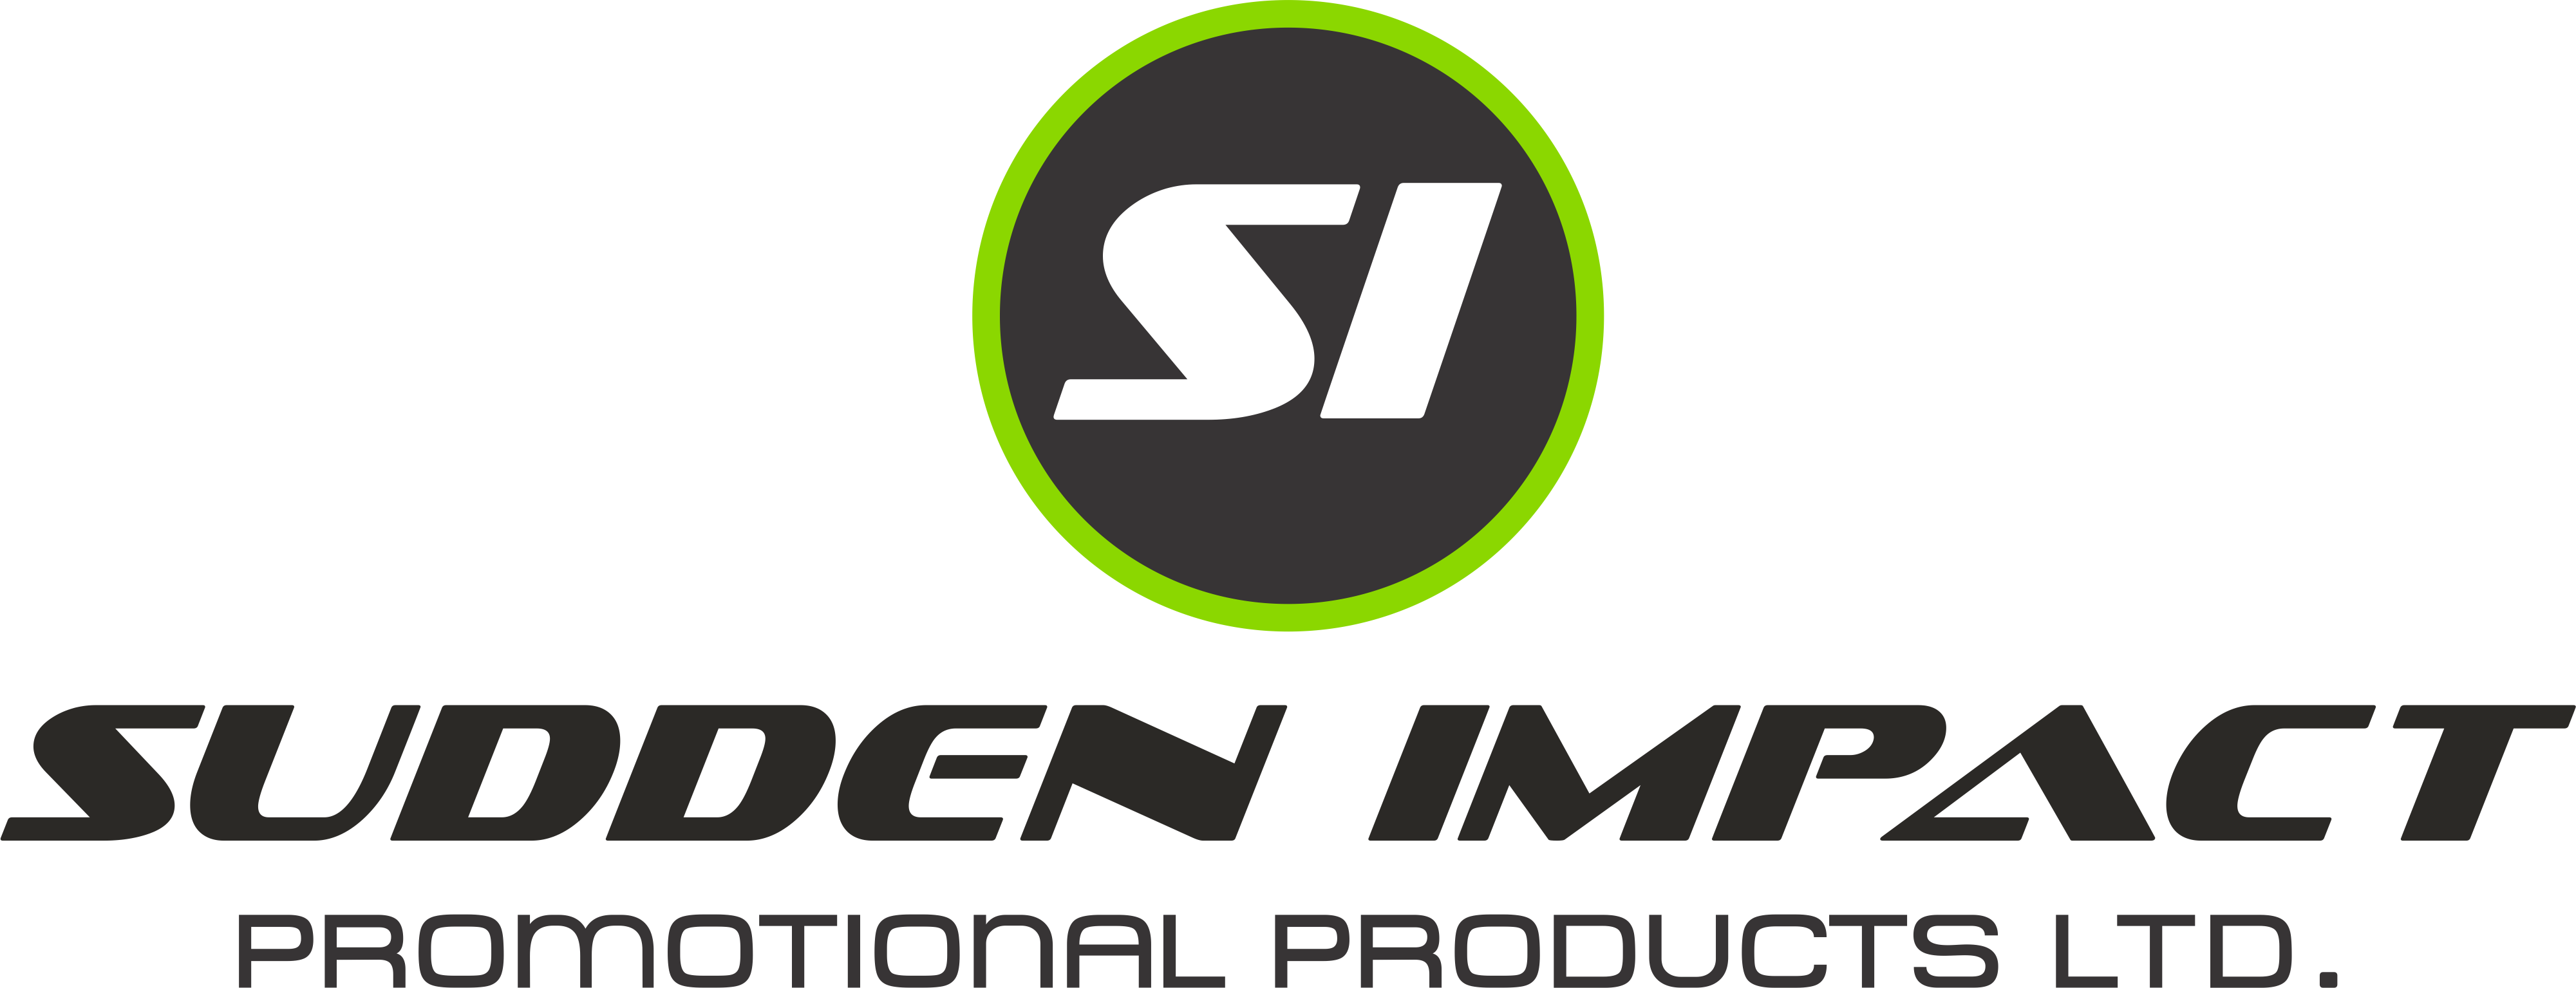 Sudden Impact Promotional Products Ltd.'s Logo